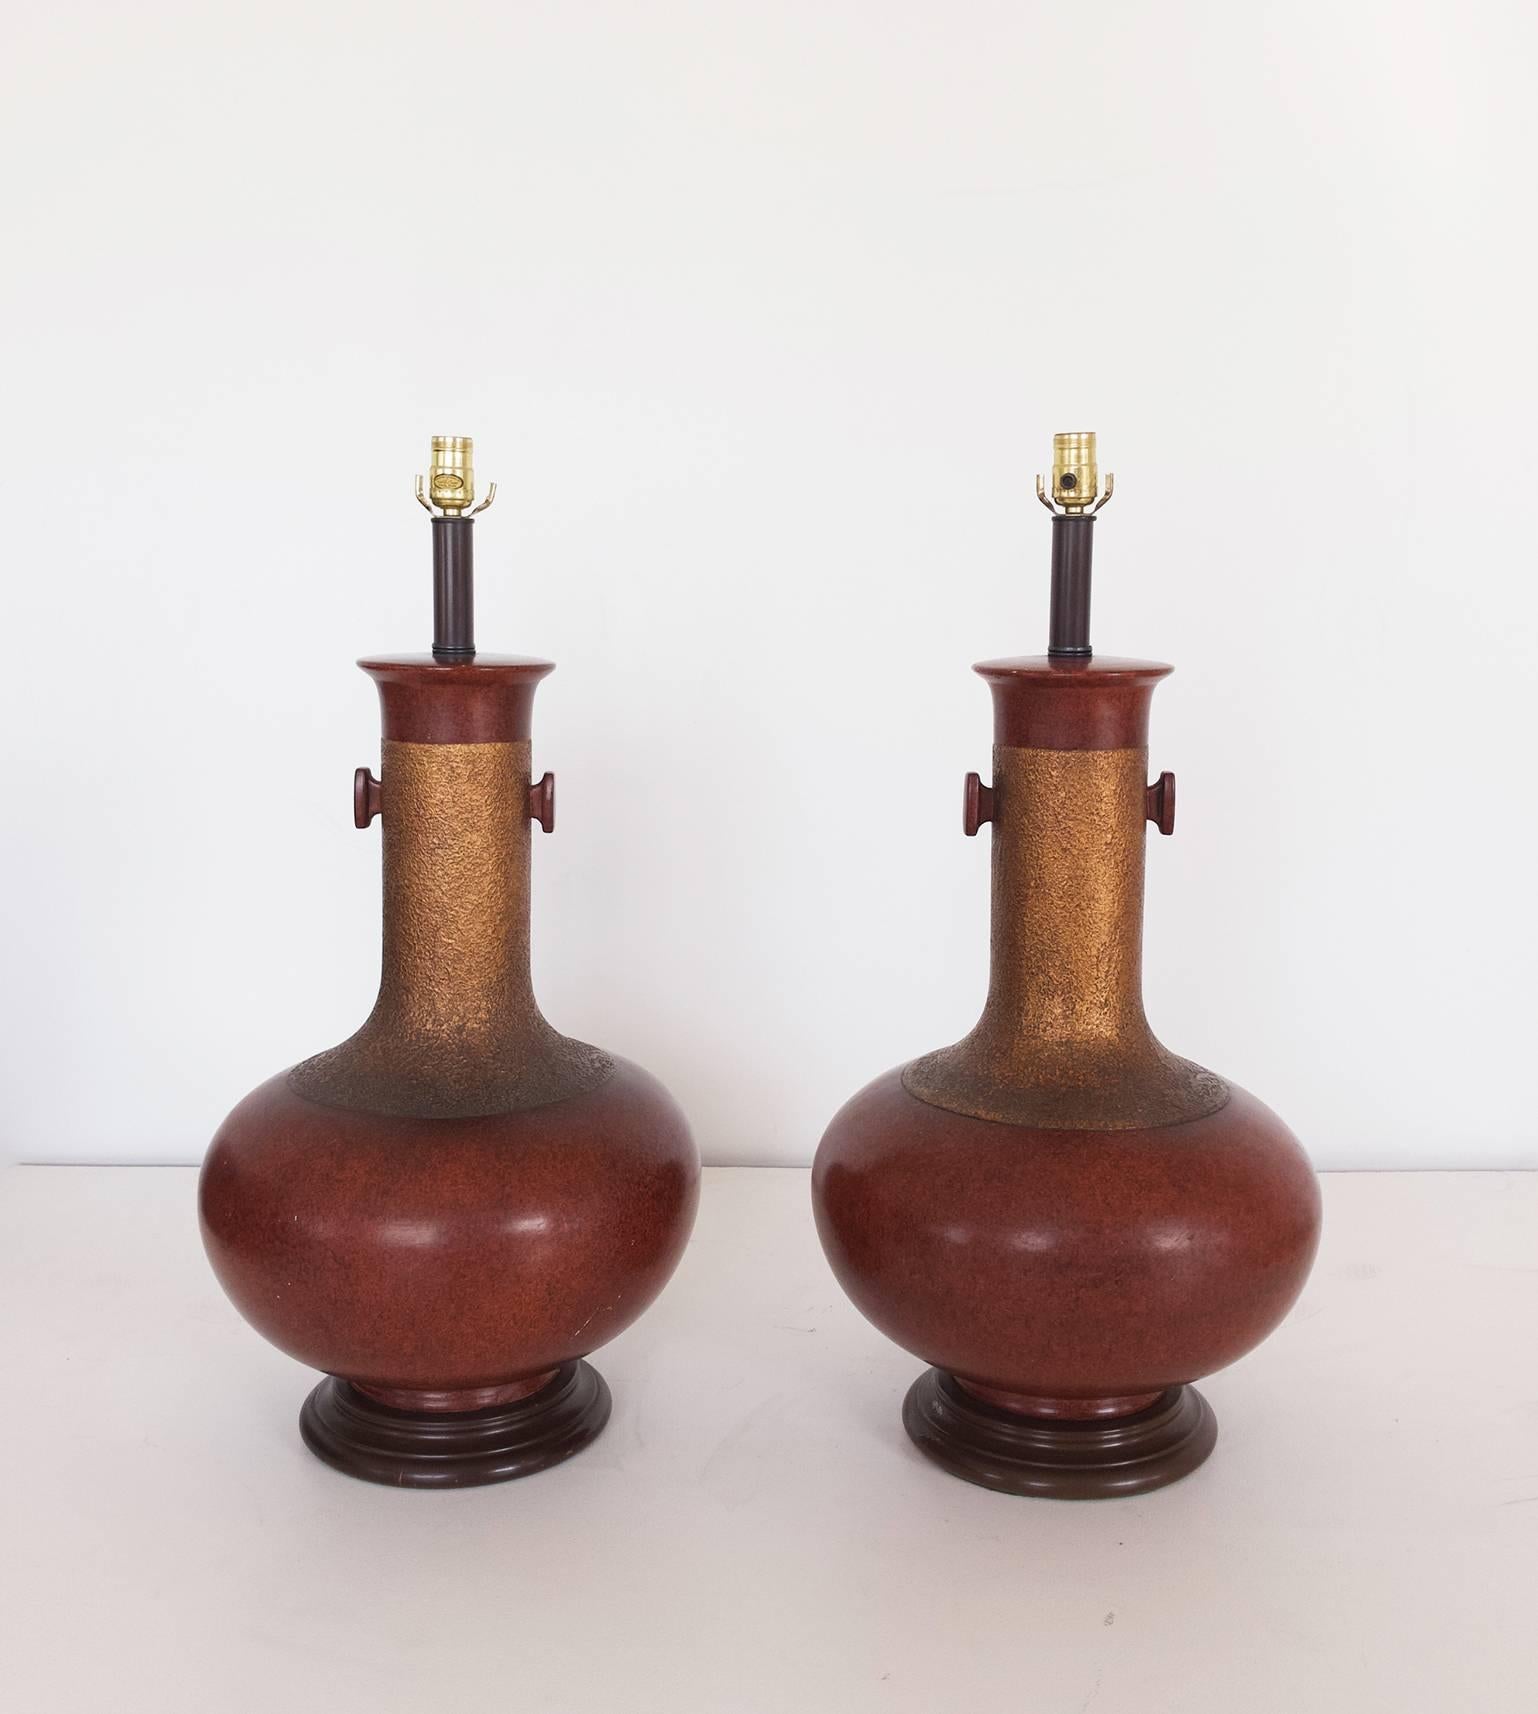 Hollywood Regency Pair of Oversized Ceramic Asian Style Urn-Shaped Table Lamps, 1960s For Sale